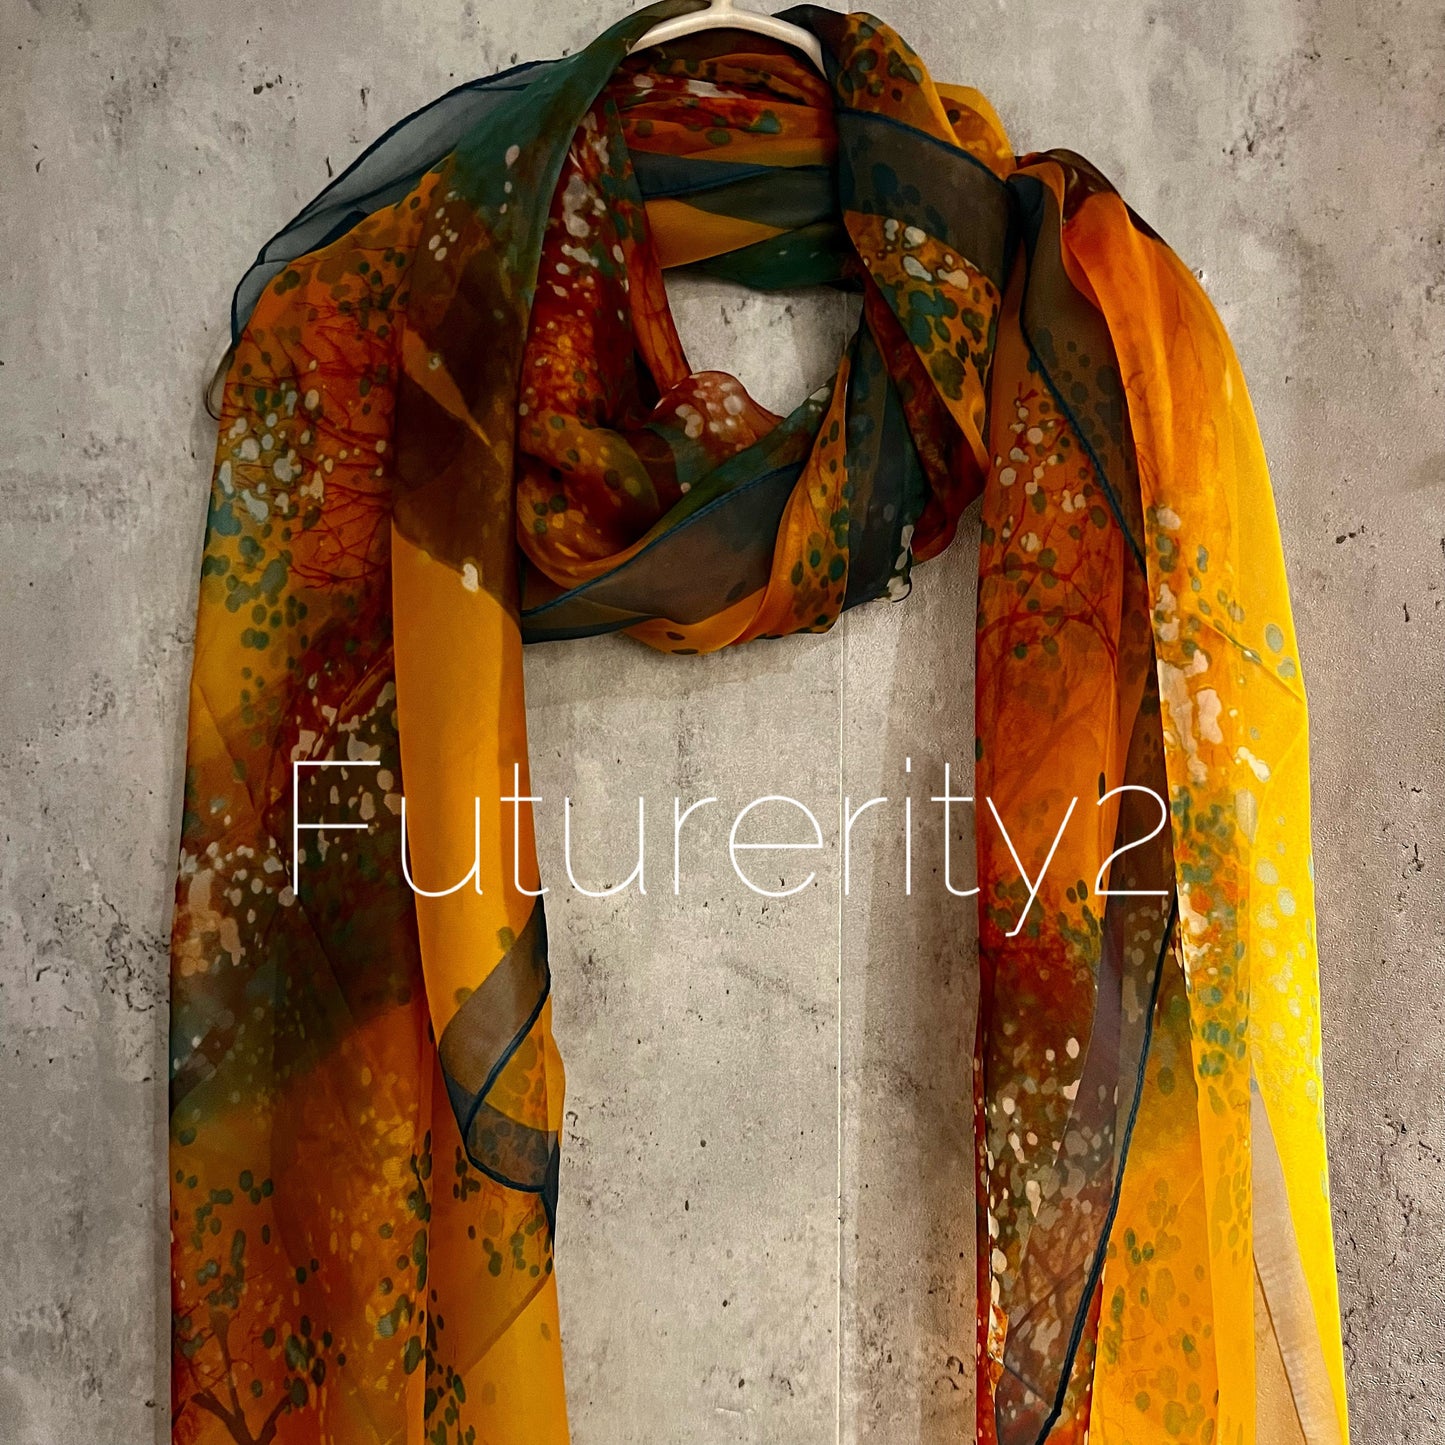 Watercolour Trees Yellow Silk Scarf/Spring Summer Autumn Scarf/Gifts For Her Birthday Christmas/Gifts For Mum/Wedding Scarf/Evening Scarf